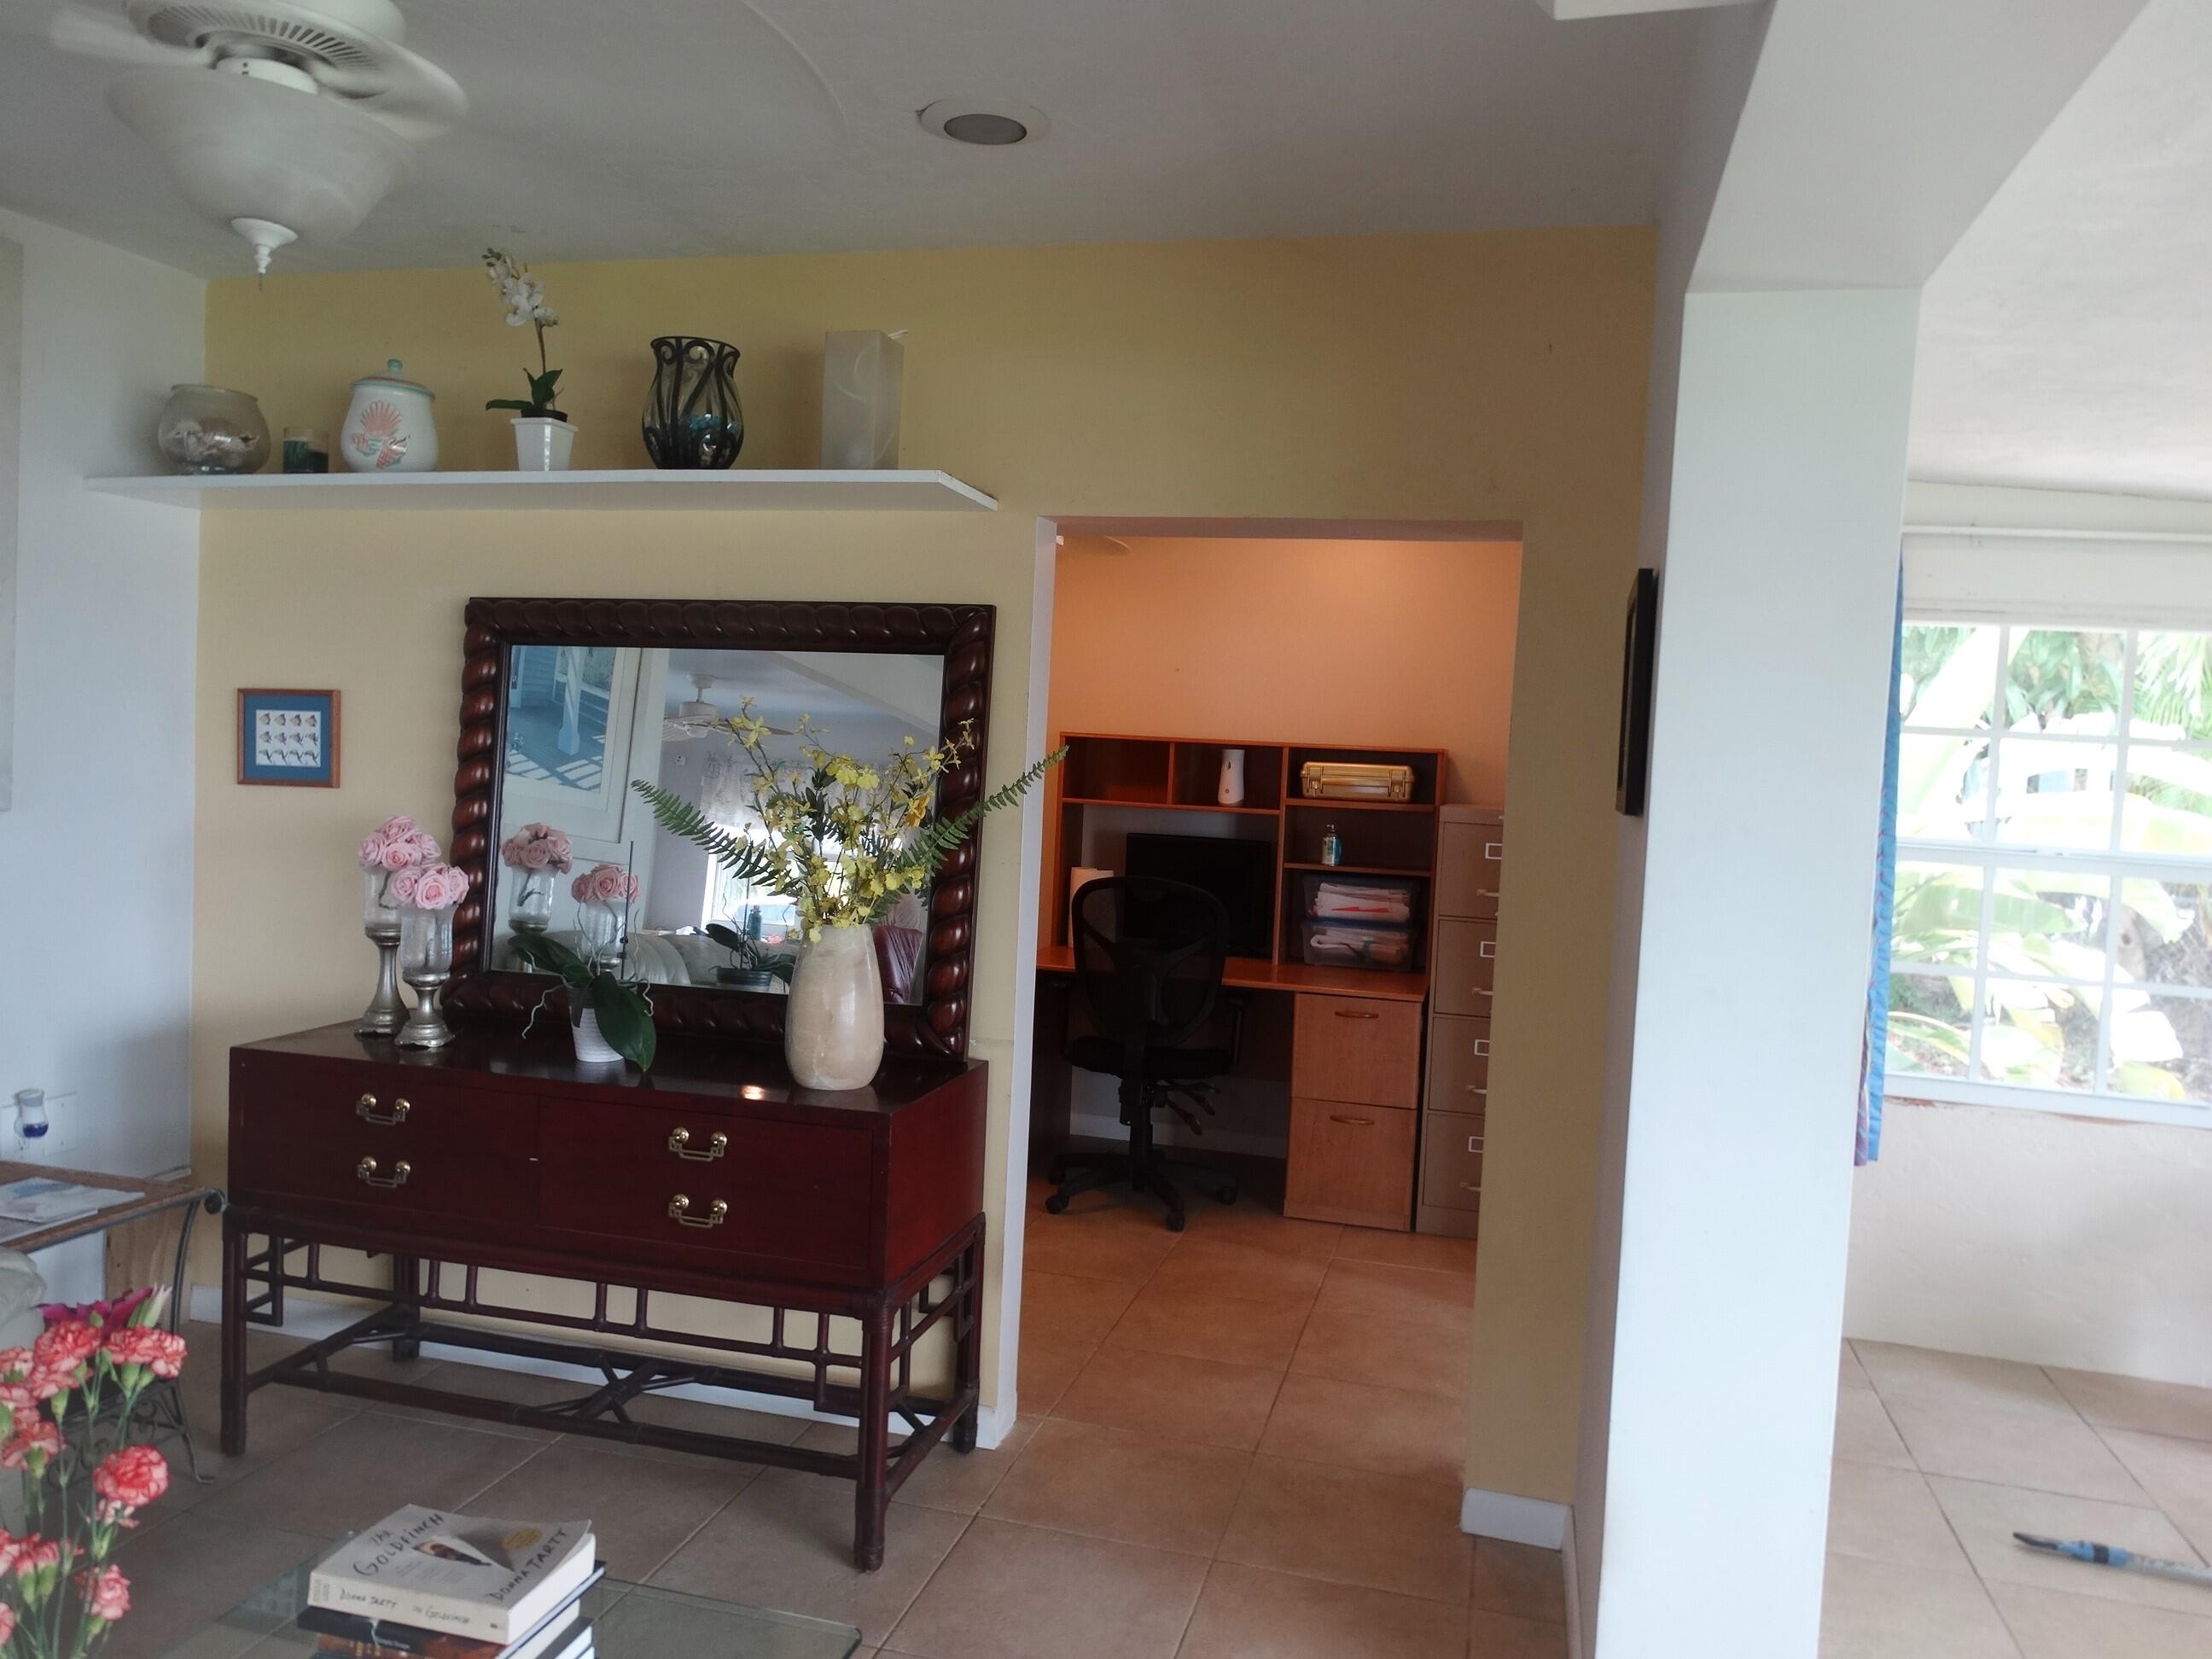 52 Beach Drive, Saddlebunch, Florida, 33040, United States, 2 Bedrooms Bedrooms, ,1 BathroomBathrooms,Residential,For Sale,52 Beach Drive,1219209